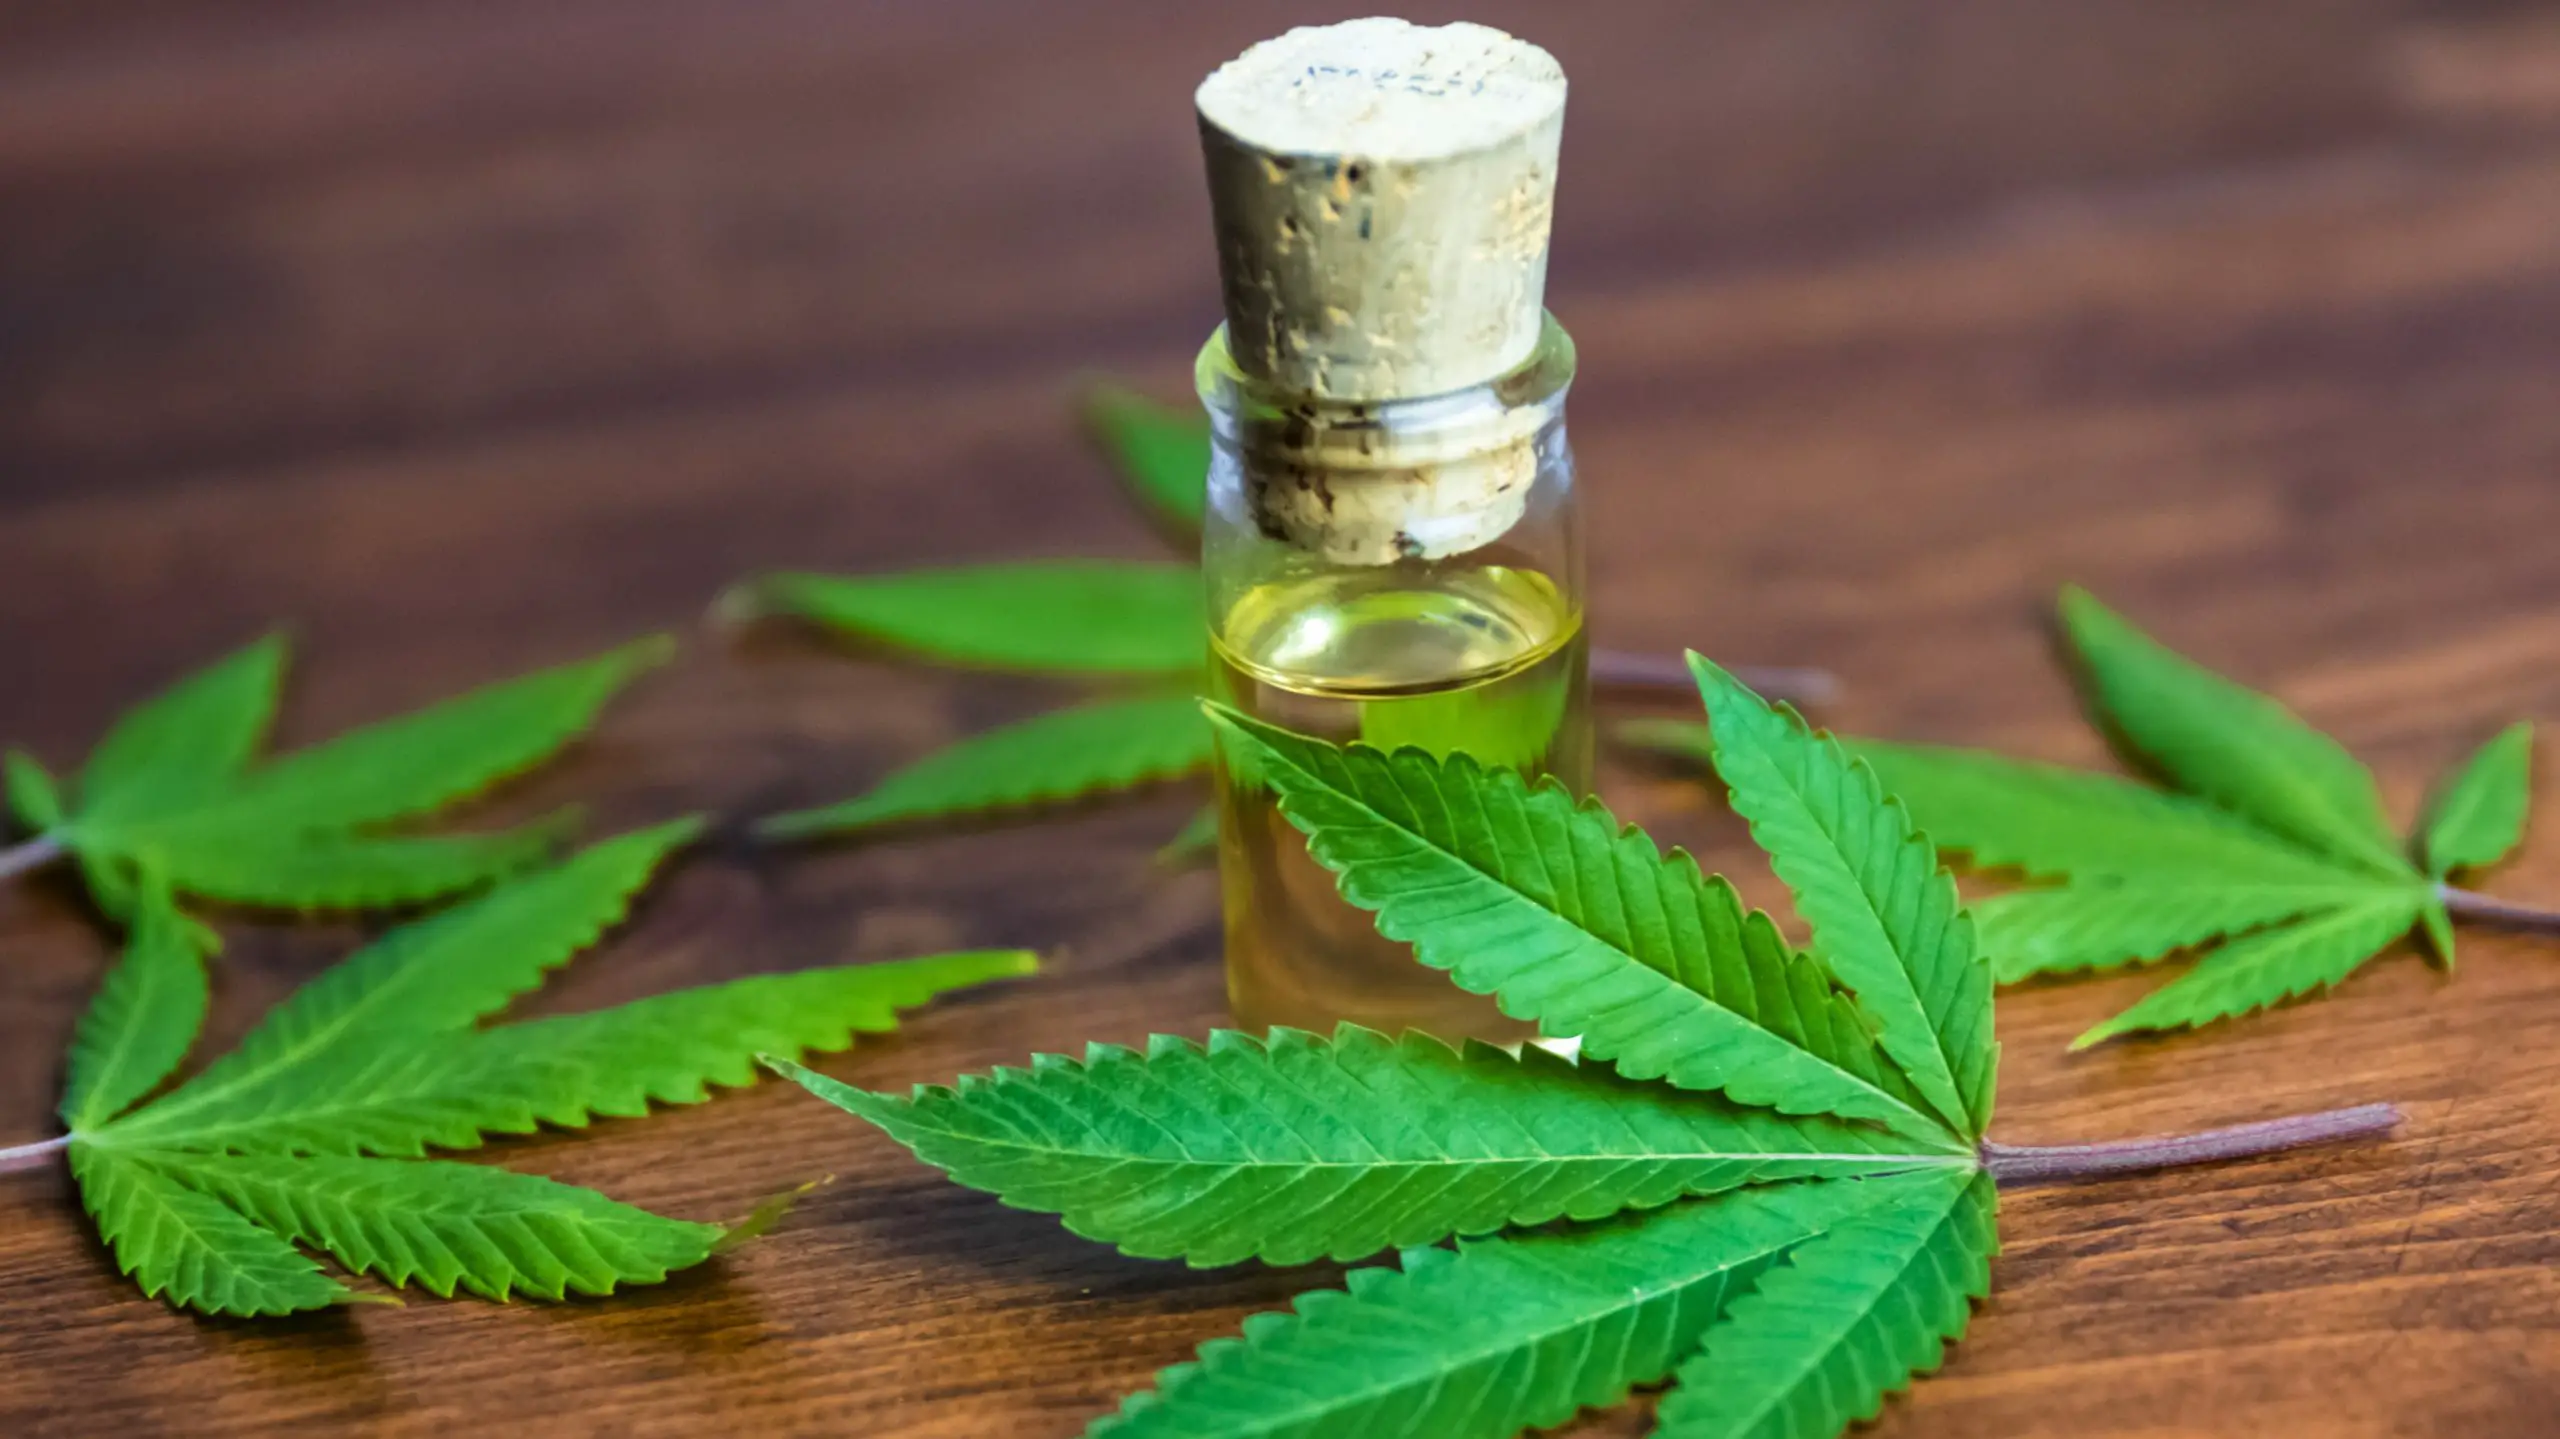 Feds continue to refuse to make CBD legal without explicit FDA approval ...